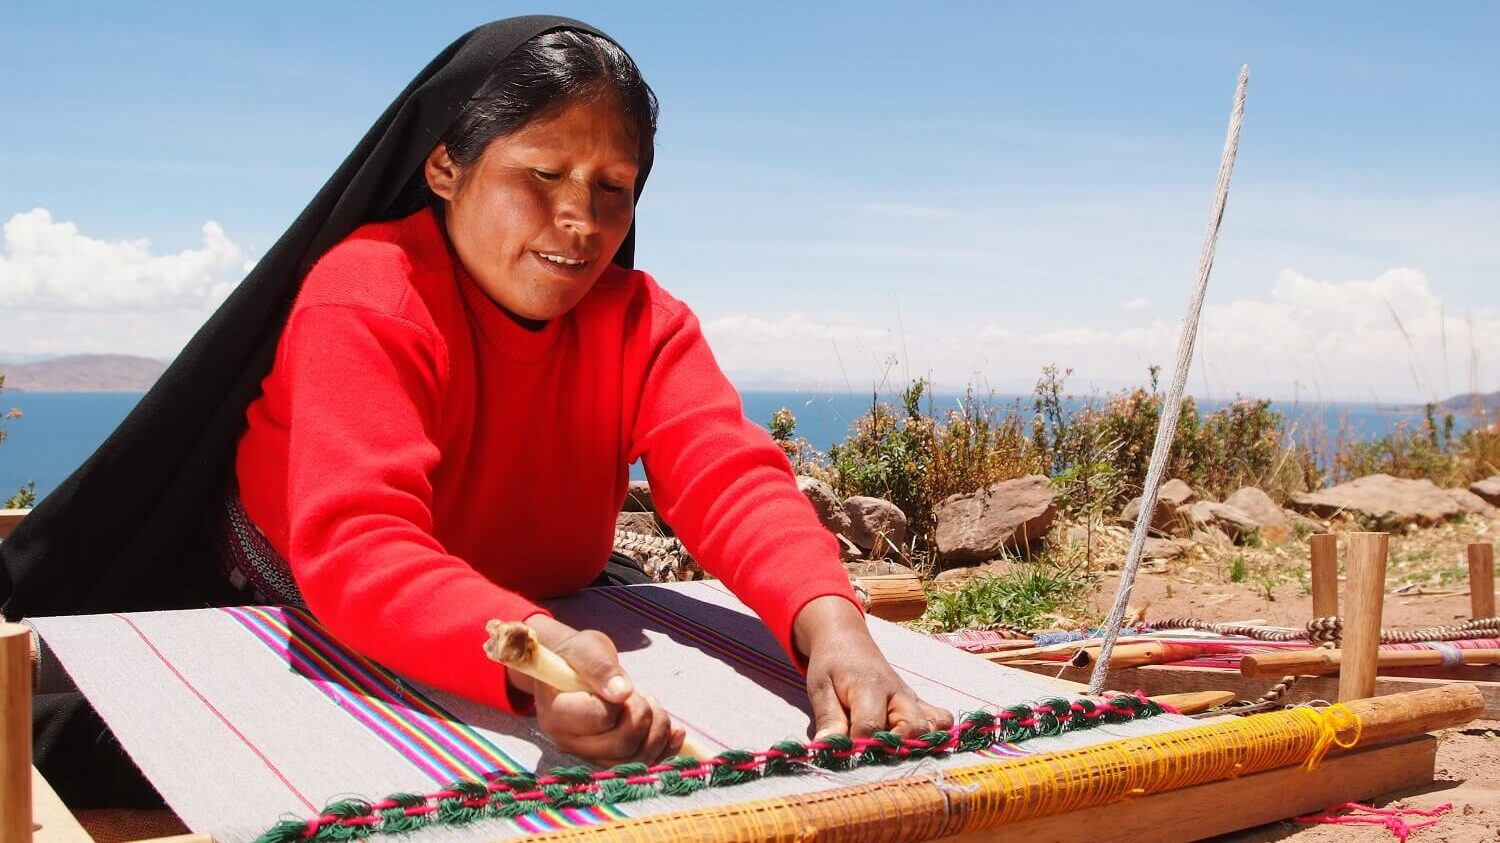 Weaving lady on Taquile island, Lake Titicaca, Peru. Community Based tourism in Peru with RESPONSible Travel Peru